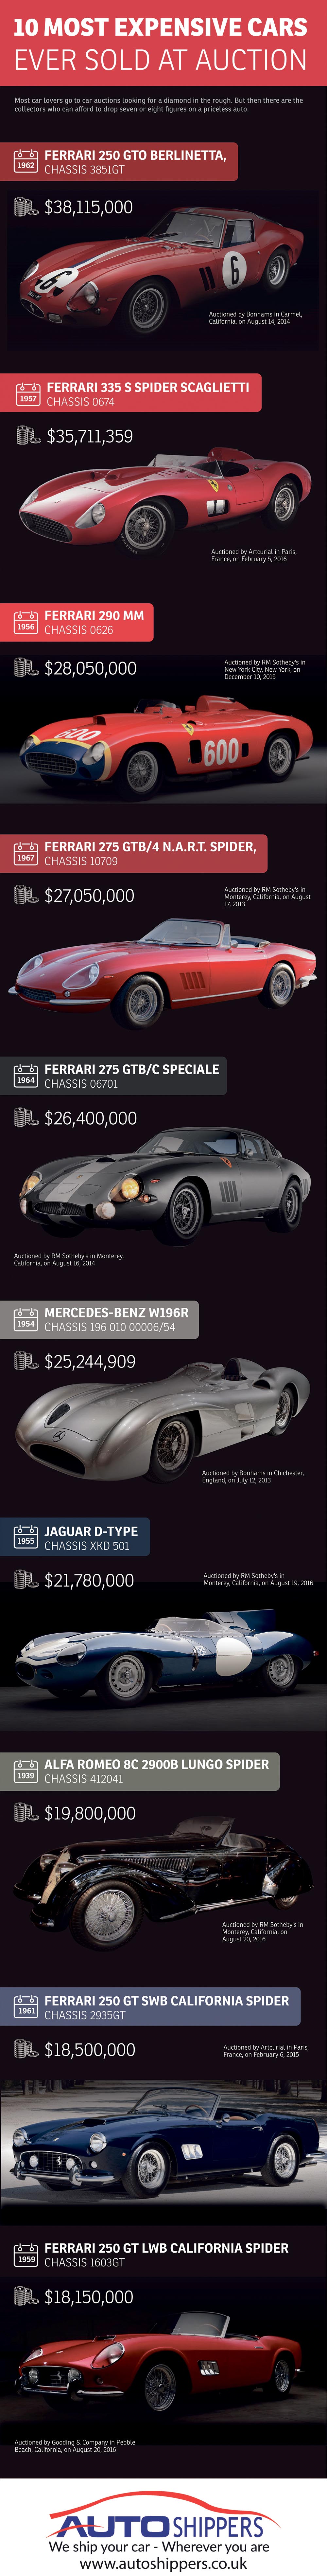 10 Most Expensive Cars Ever Sold at Auction